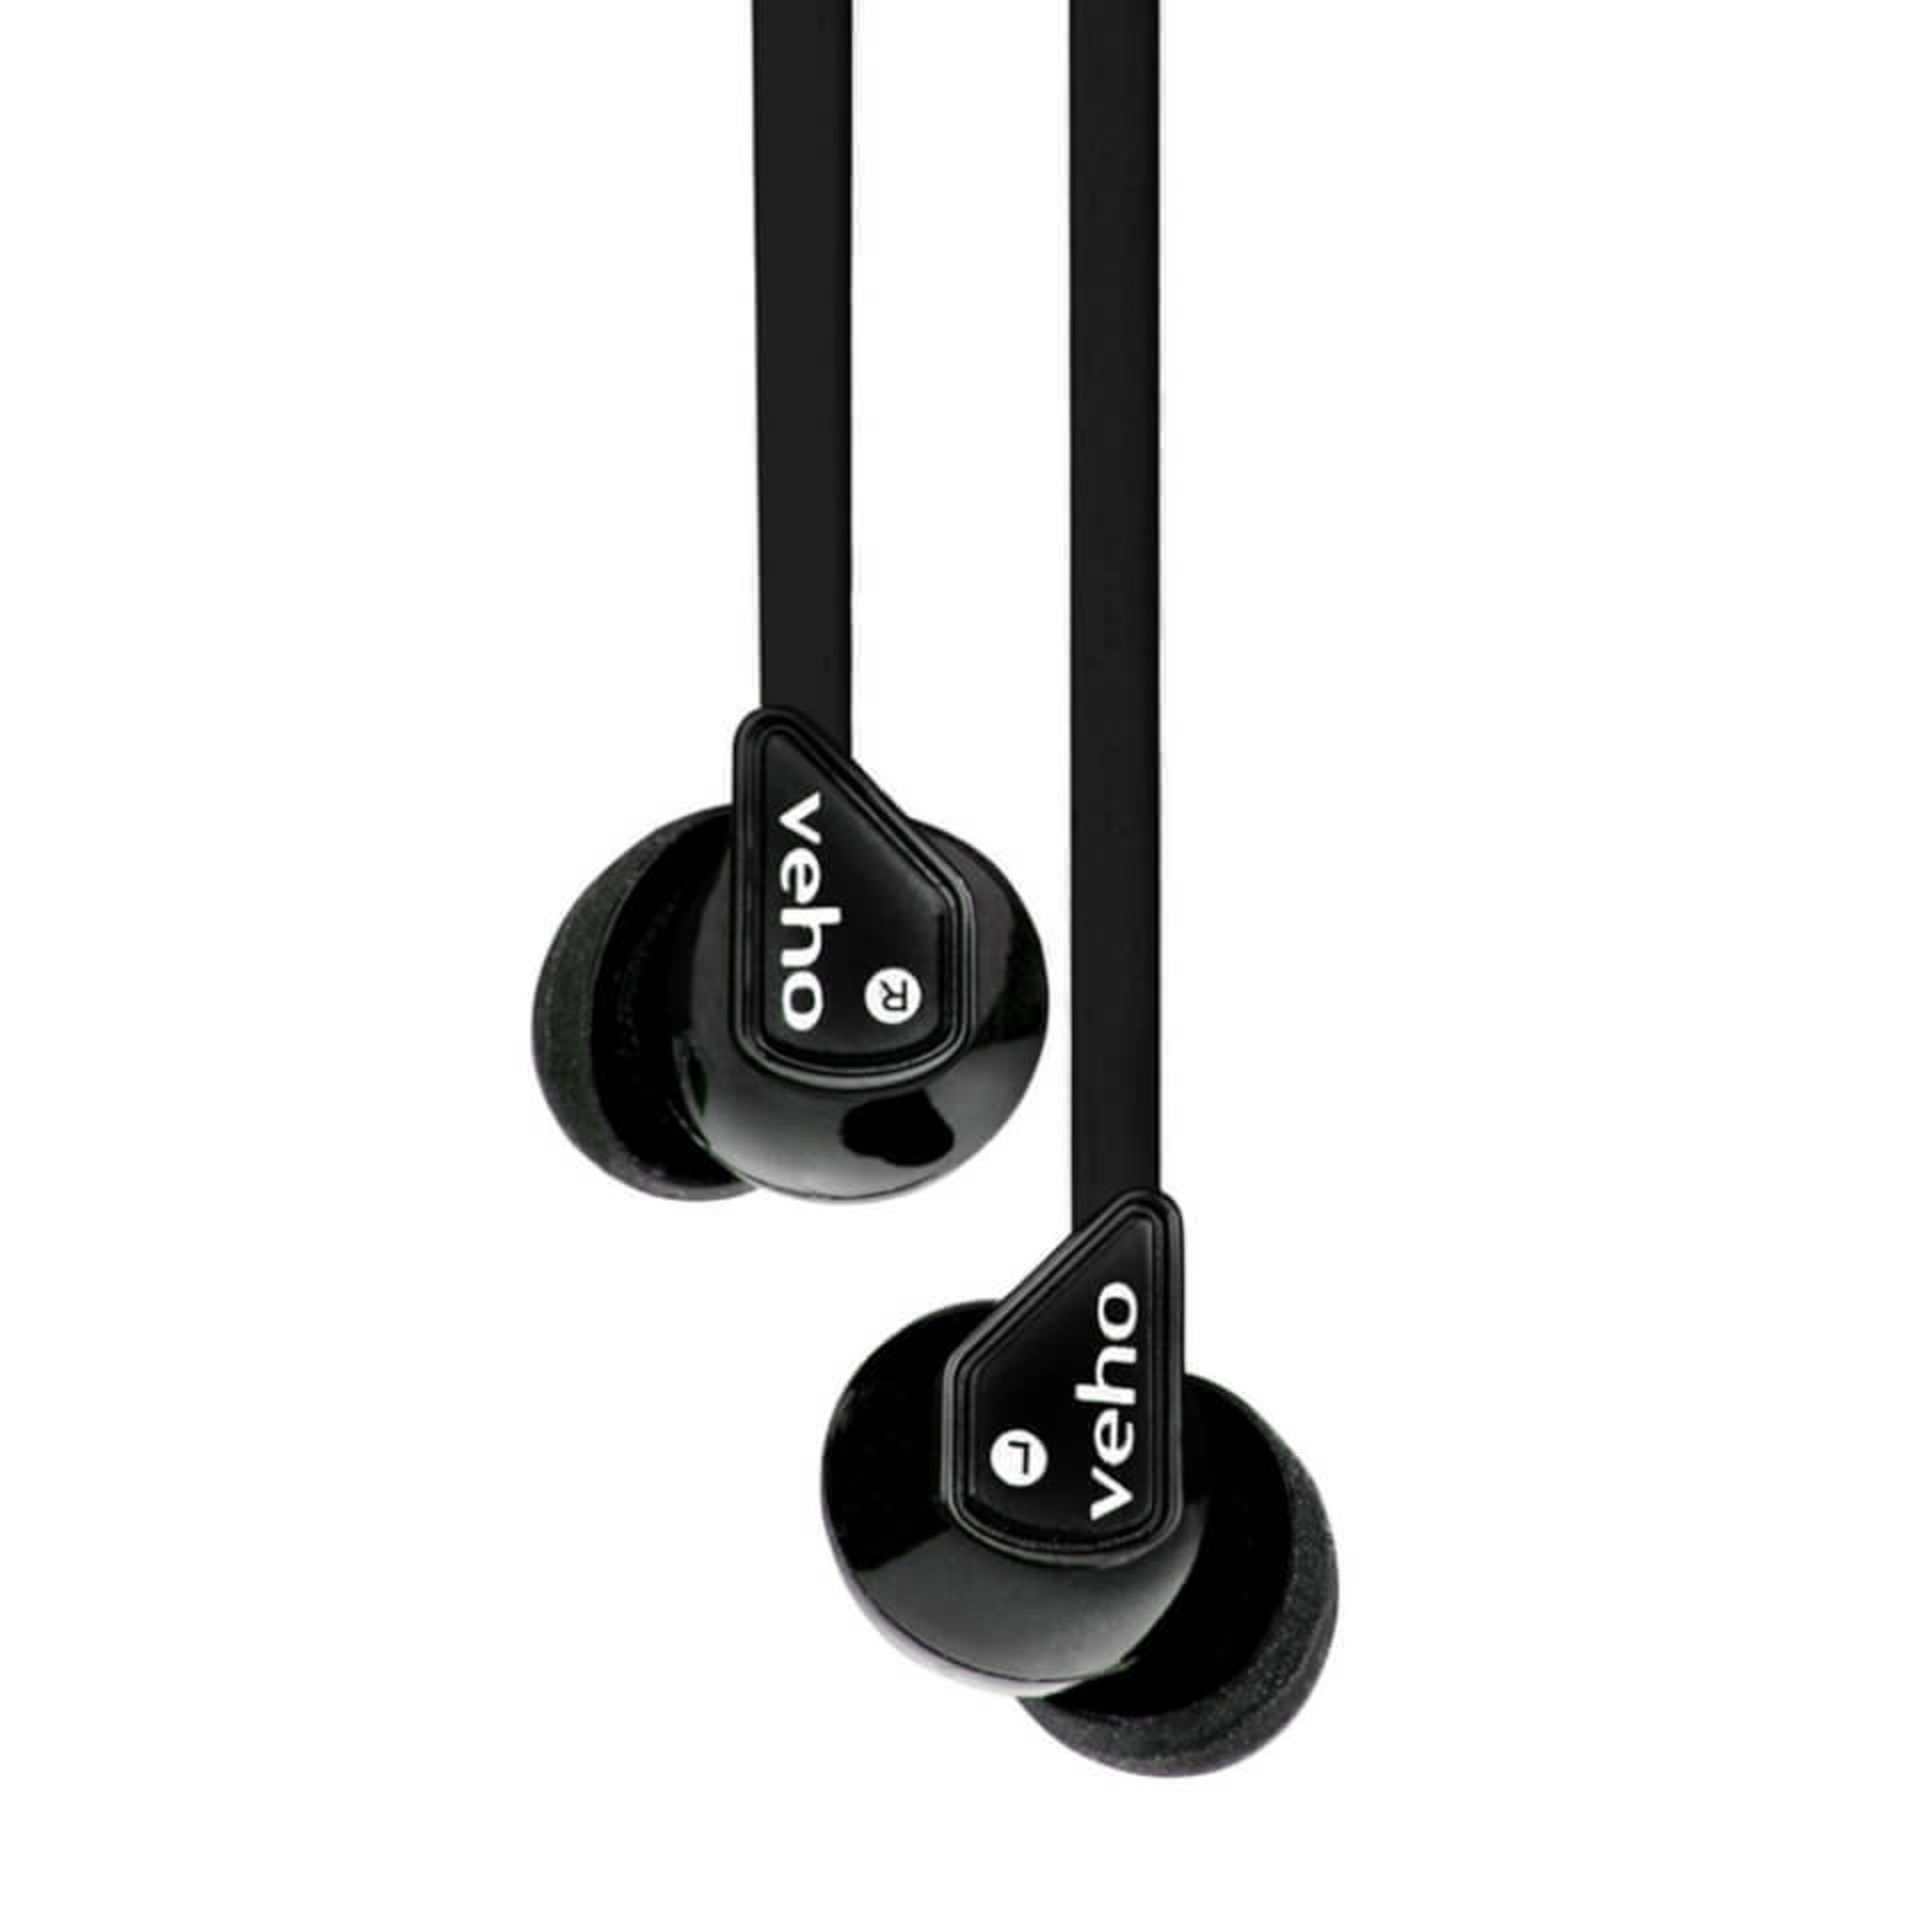 V *TRADE QTY* Brand New Veho Z-1 Noise Isolating Stereo Earbuds - Black - Online Price £19.95 X 5